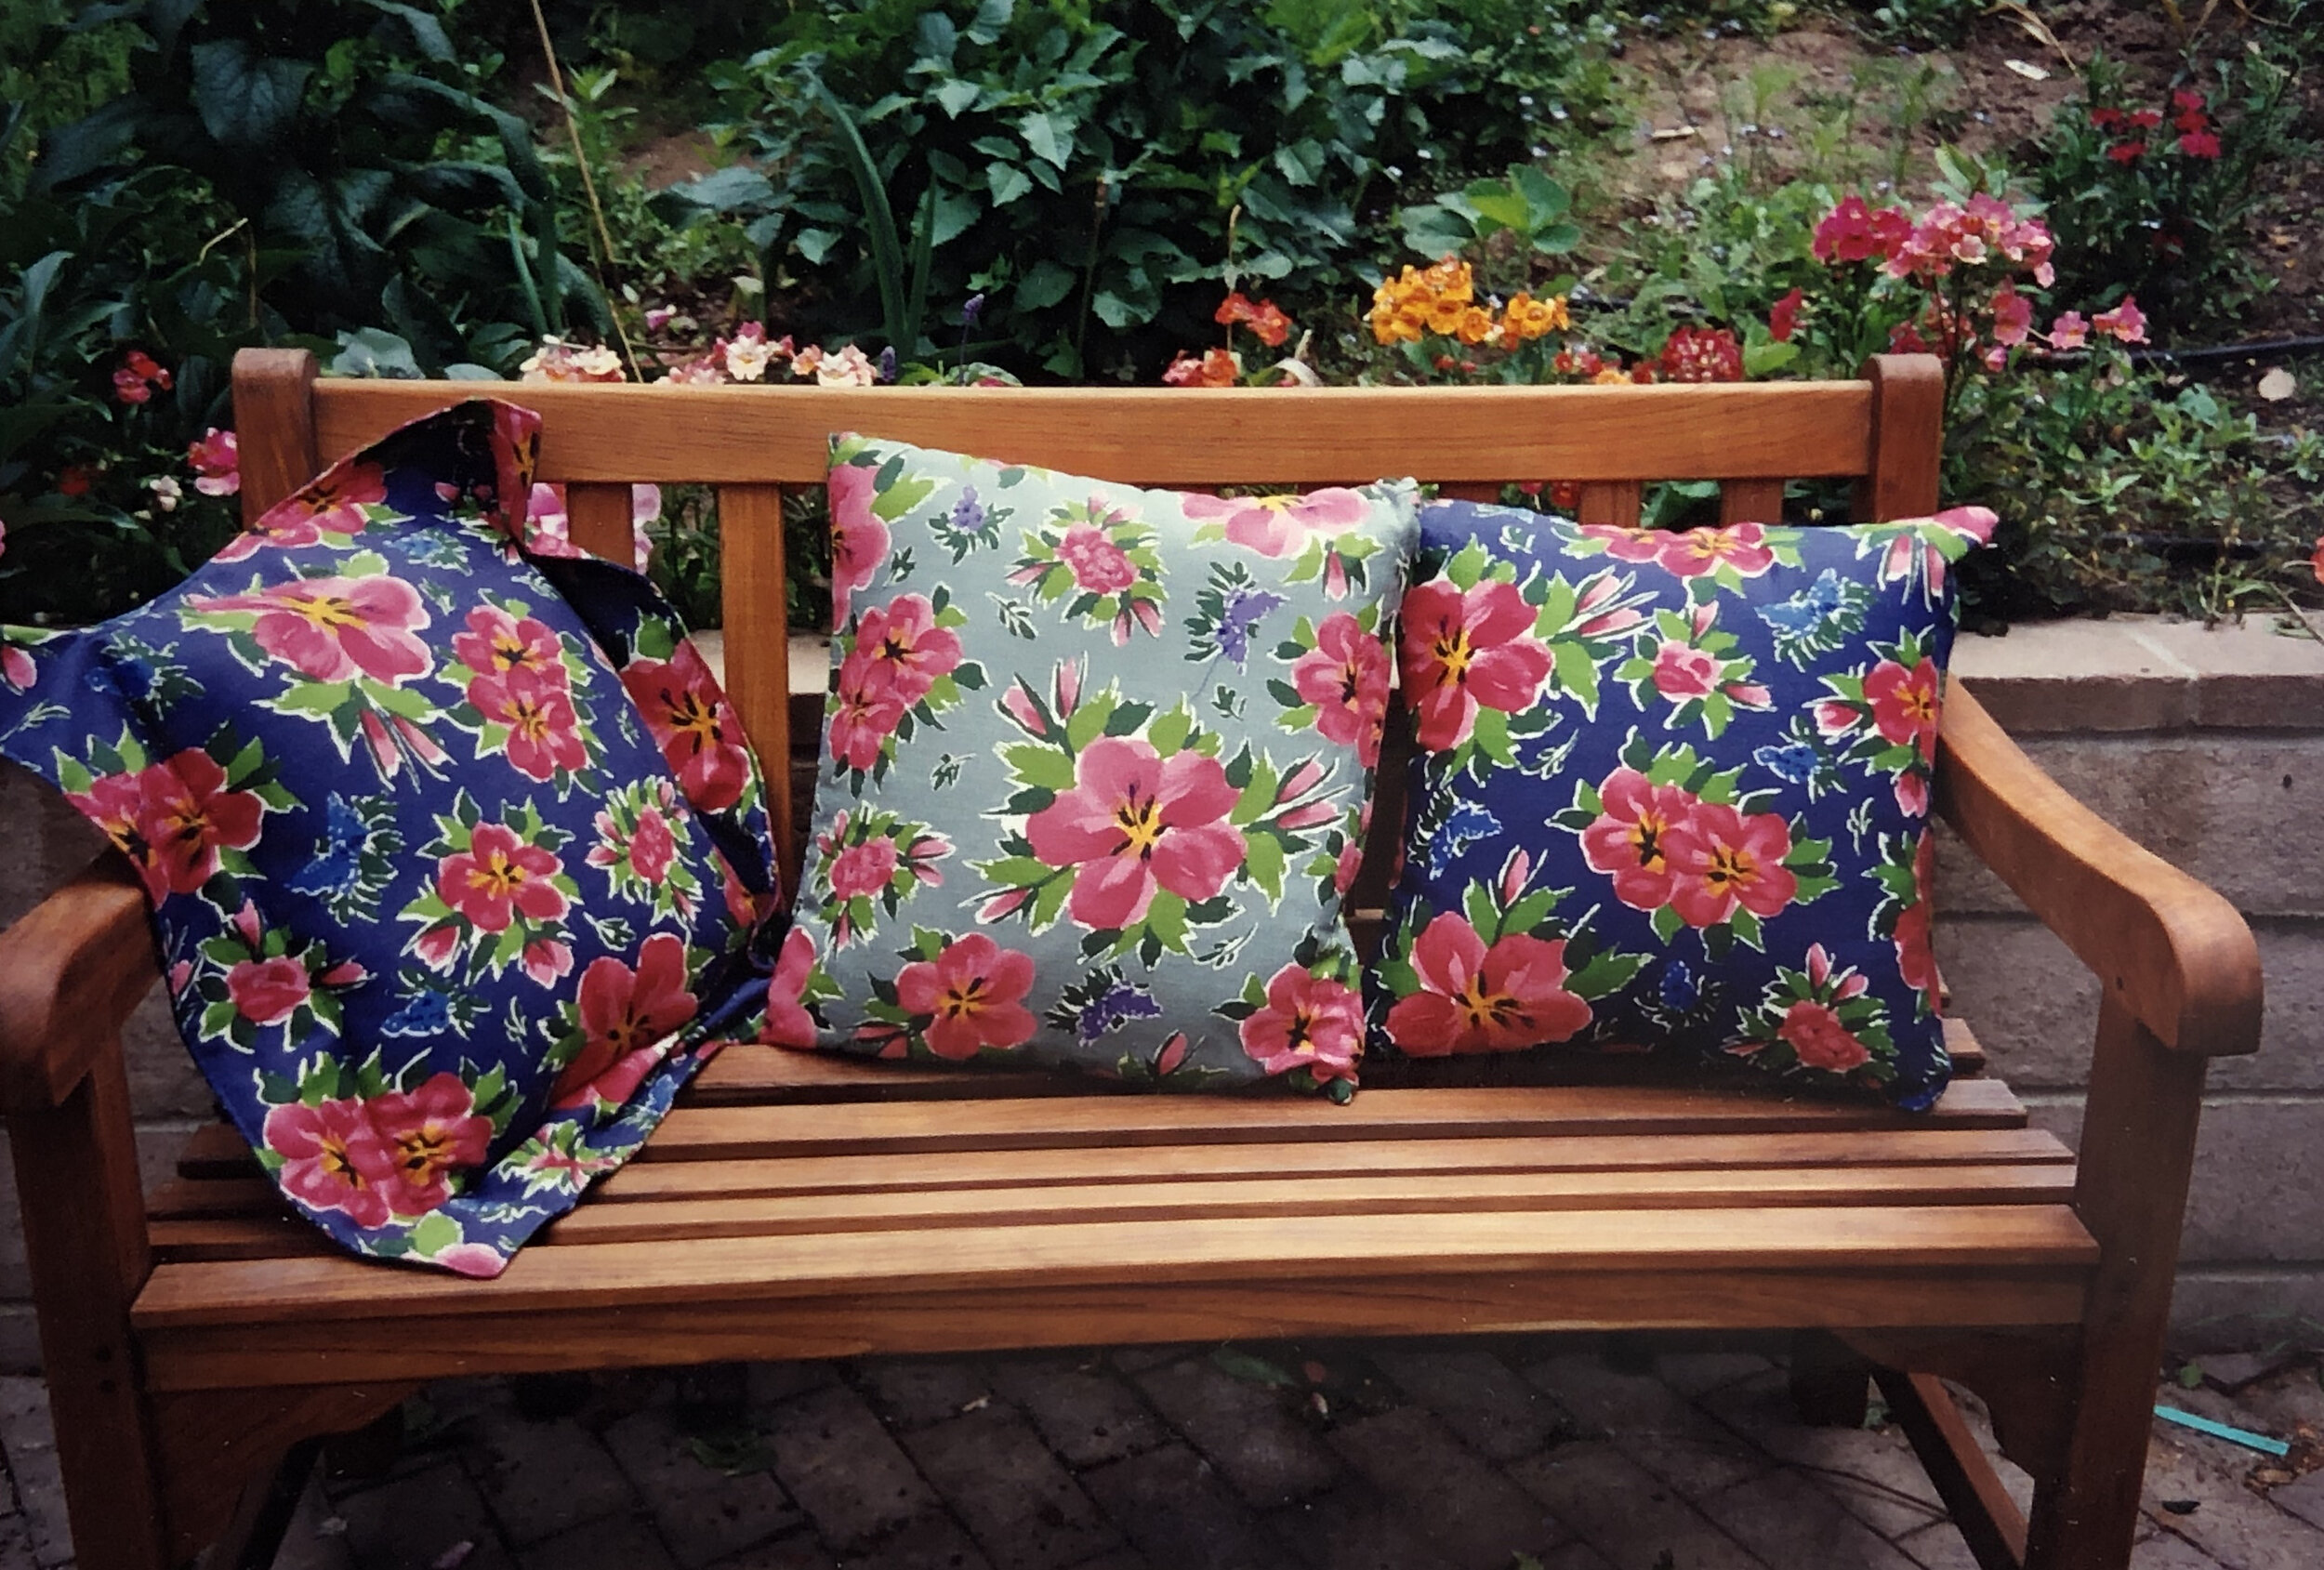 Hibiscus Pillows on Bench.jpg